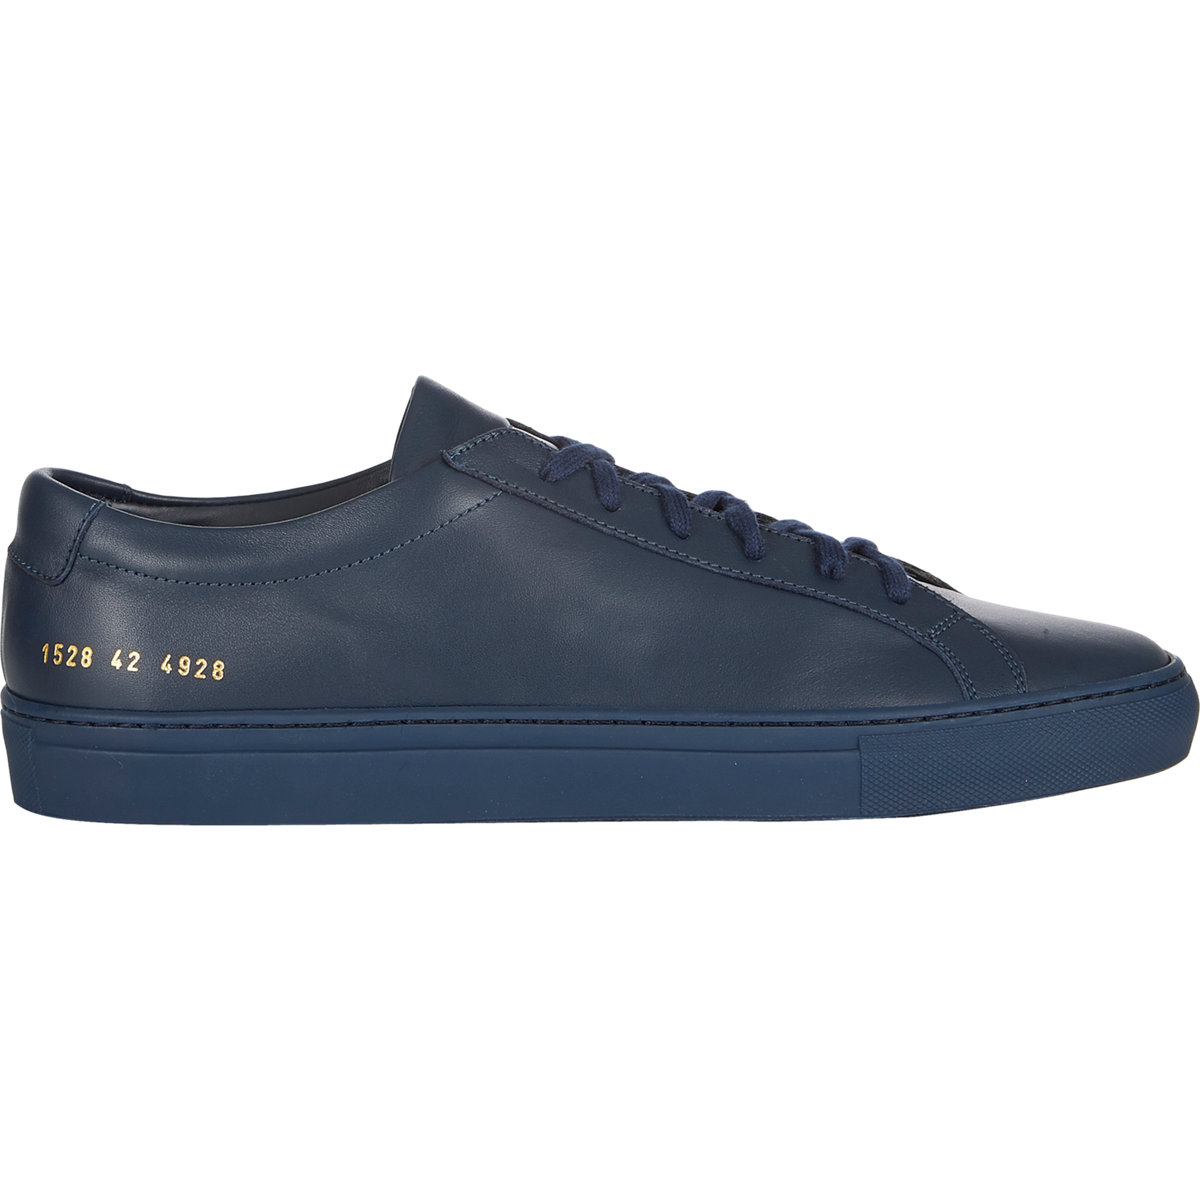 Lyst - Common Projects Achilles Original Leather Low-Top Sneakers in ...